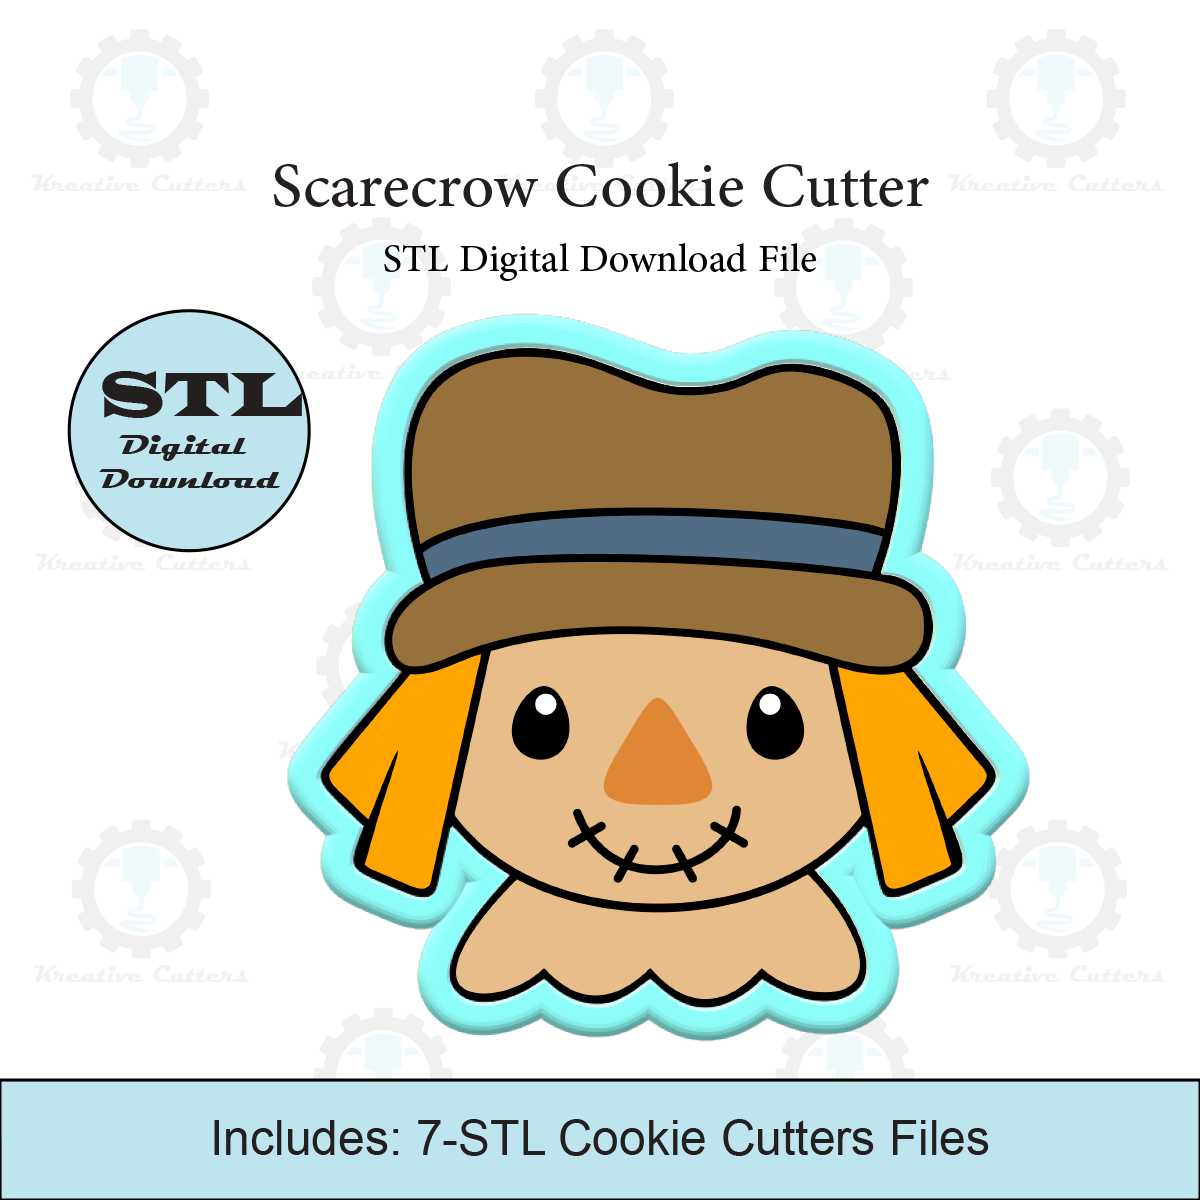 Scarecrow Cookie Cutter | STL File